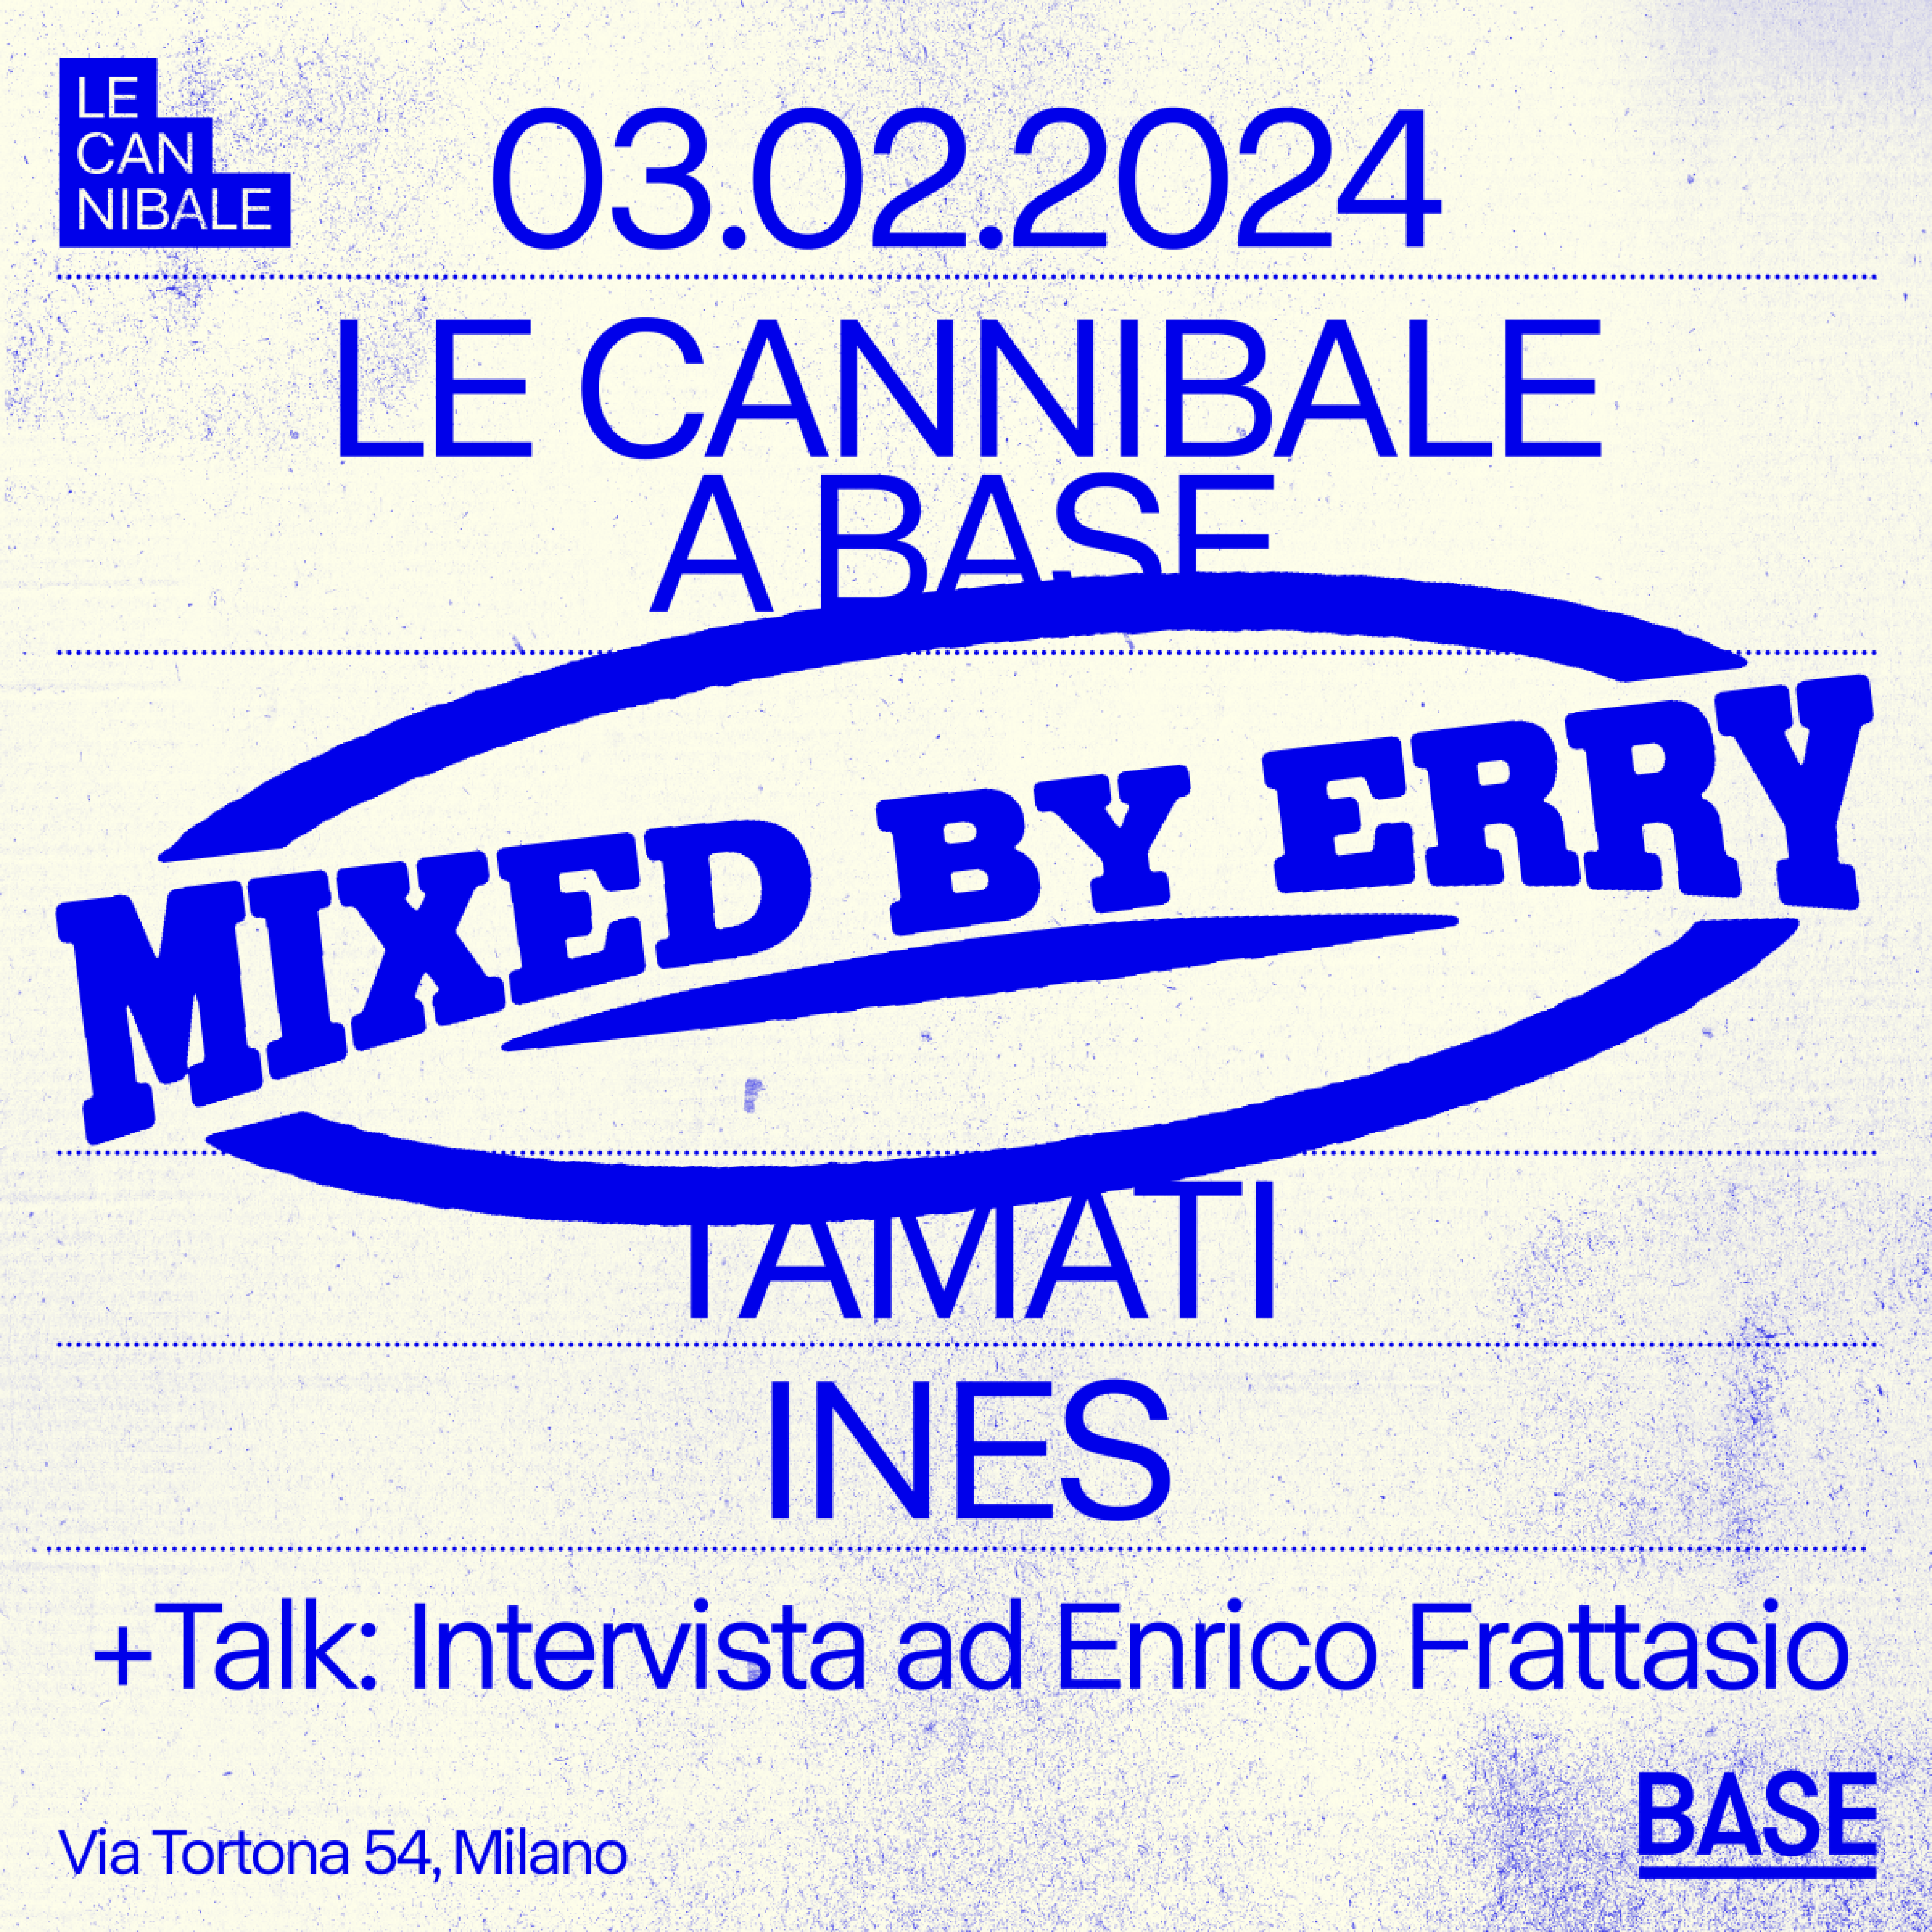 Le Cannibale - Mixed by Erry, Ines, Tamati - フライヤー裏